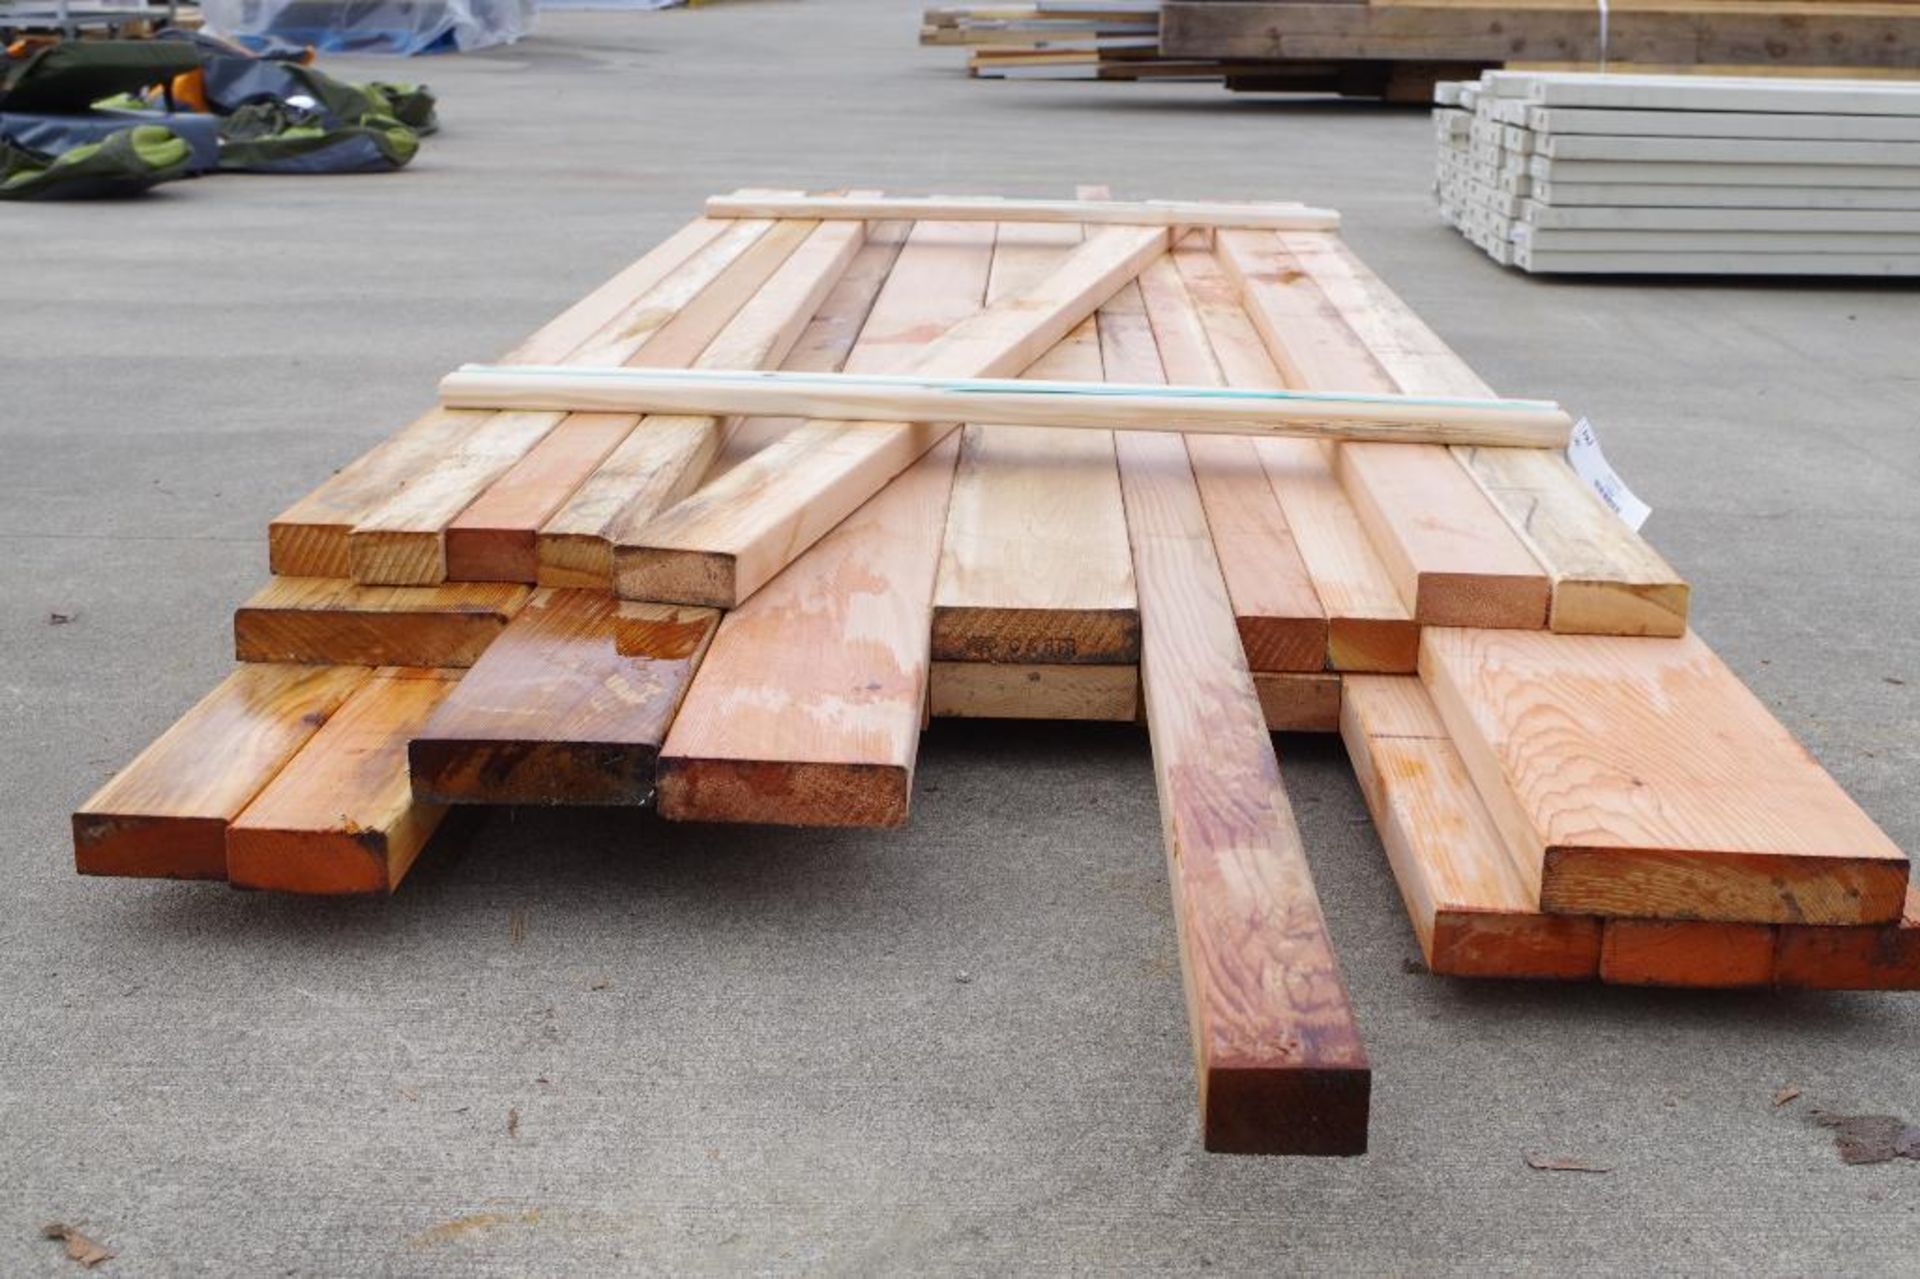 [QTY] Clear Cedar Boards, 2x8, 2x6's, 2x4's & 2x3's, Lengths up to 10' - Image 3 of 4